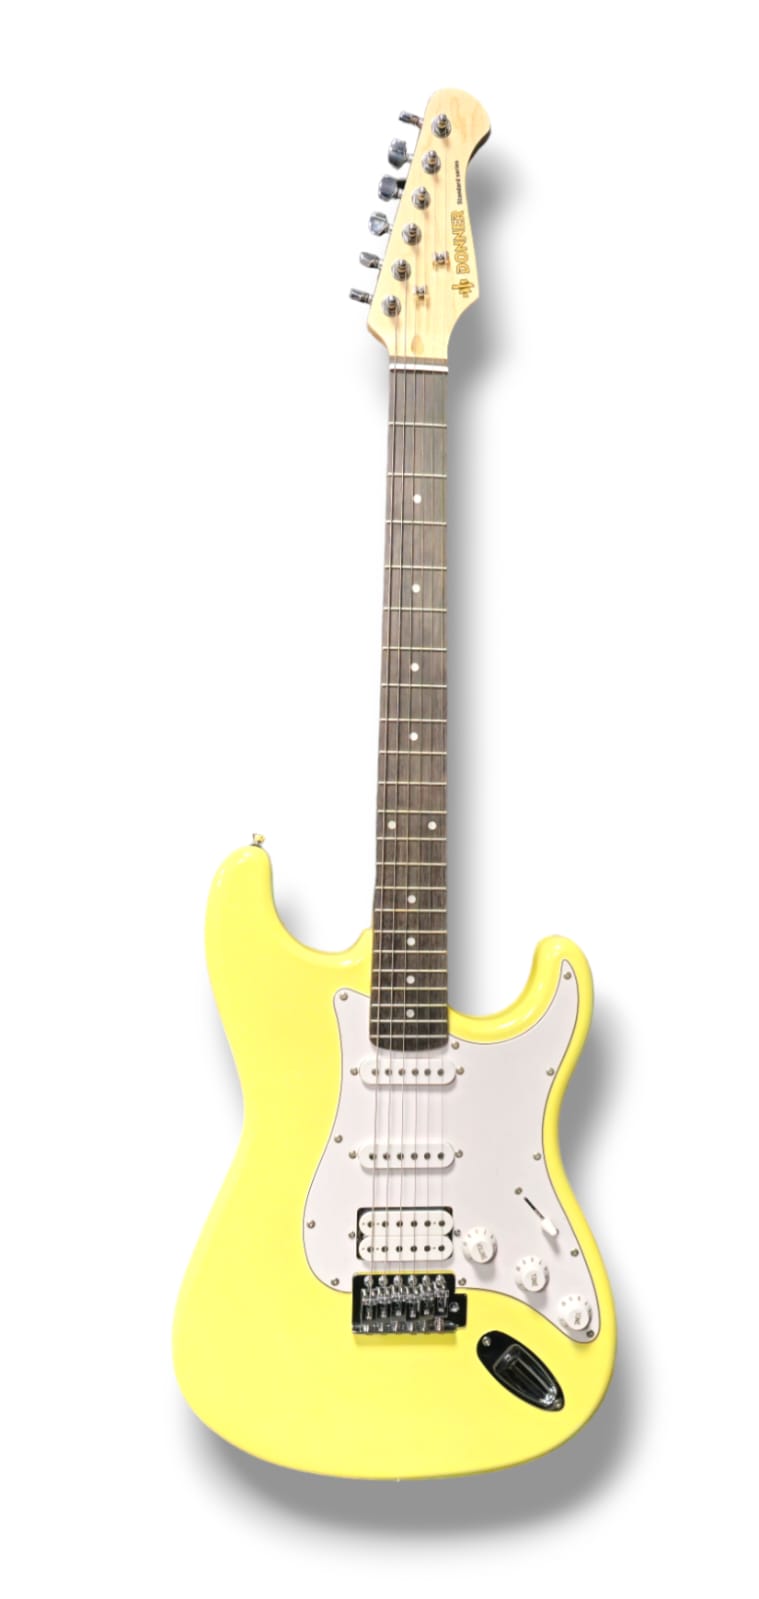 Donner strat-style electric guitar with carry bag, strap and mini amp.